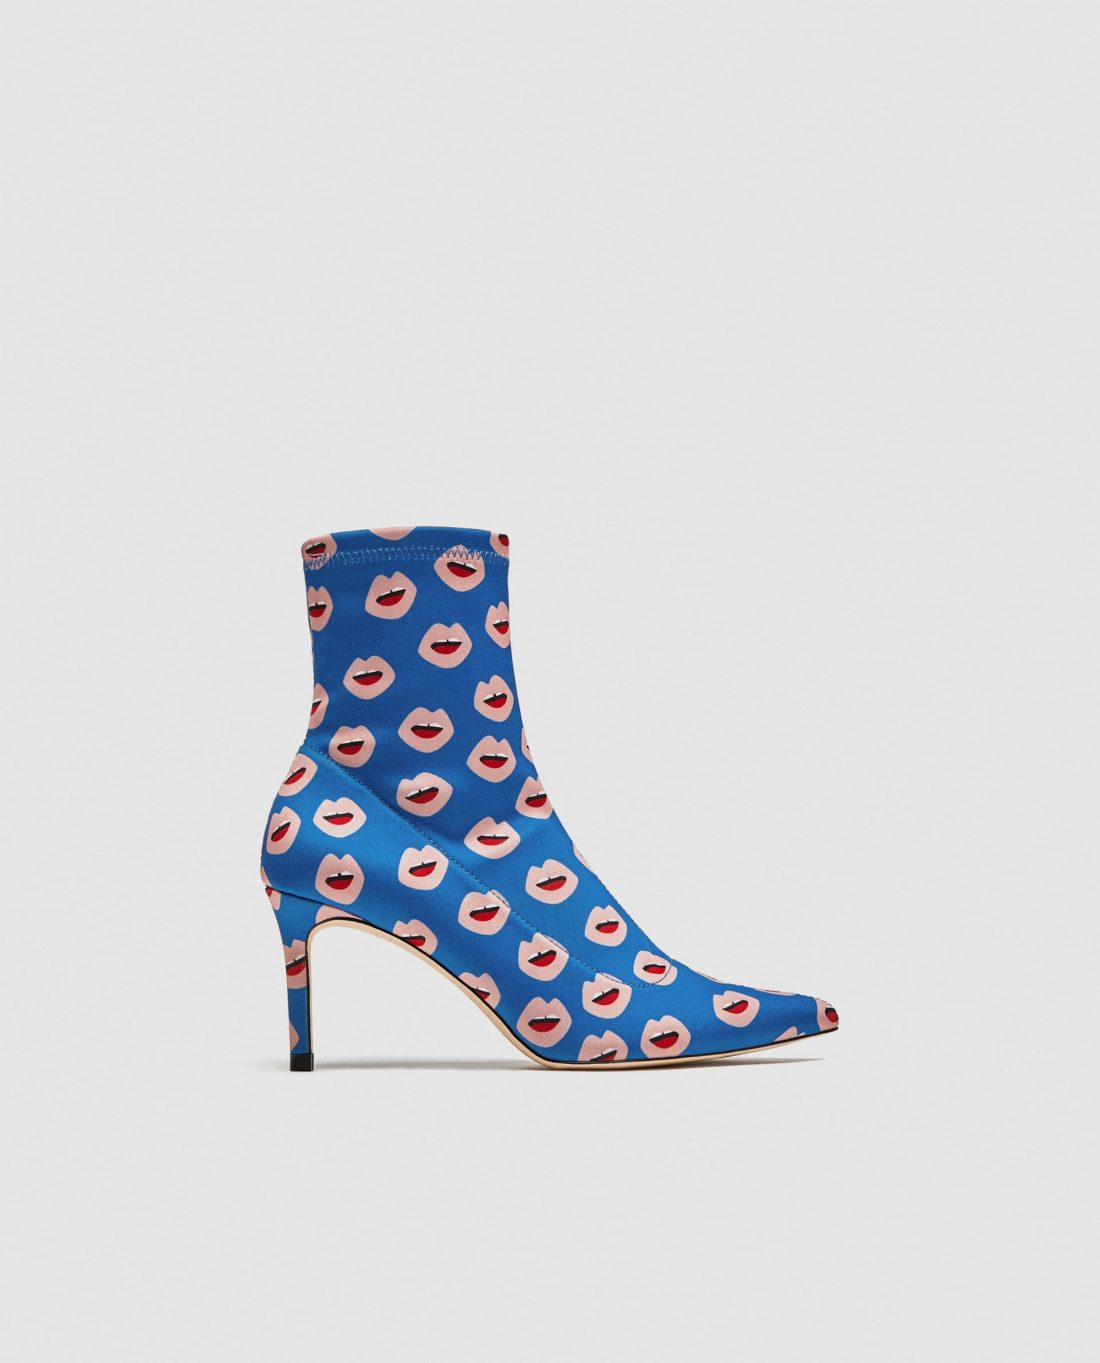 Upgrade your spring wardrobe with one of these six colourful boots fashion,boots,shoes,Upgrade your spring wardrobe,colourful boots